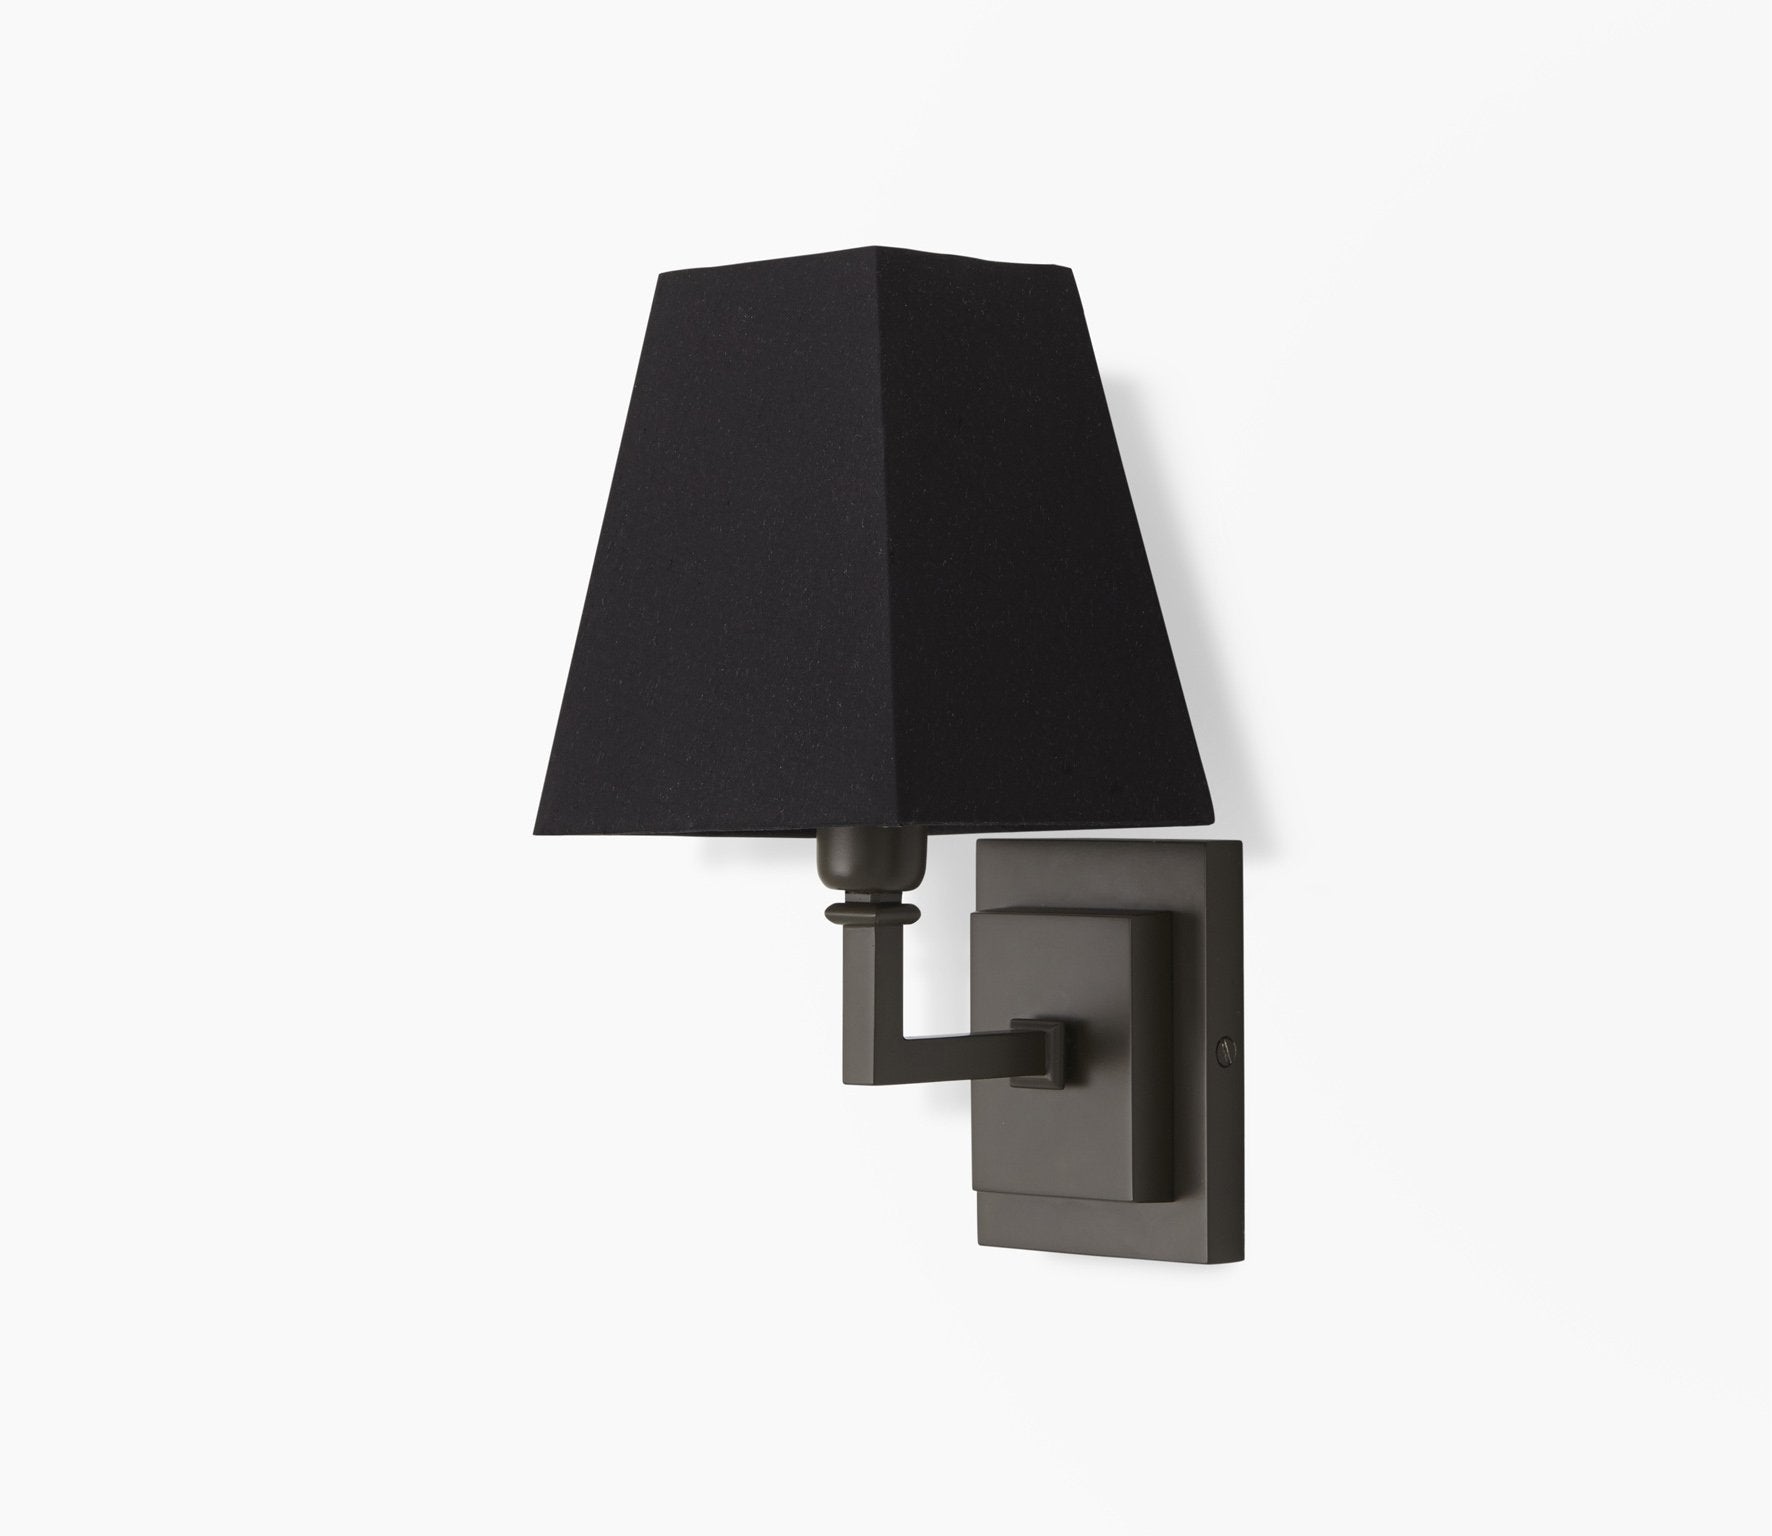 Parker Wall Light with Pyramid Shade Product Image 3